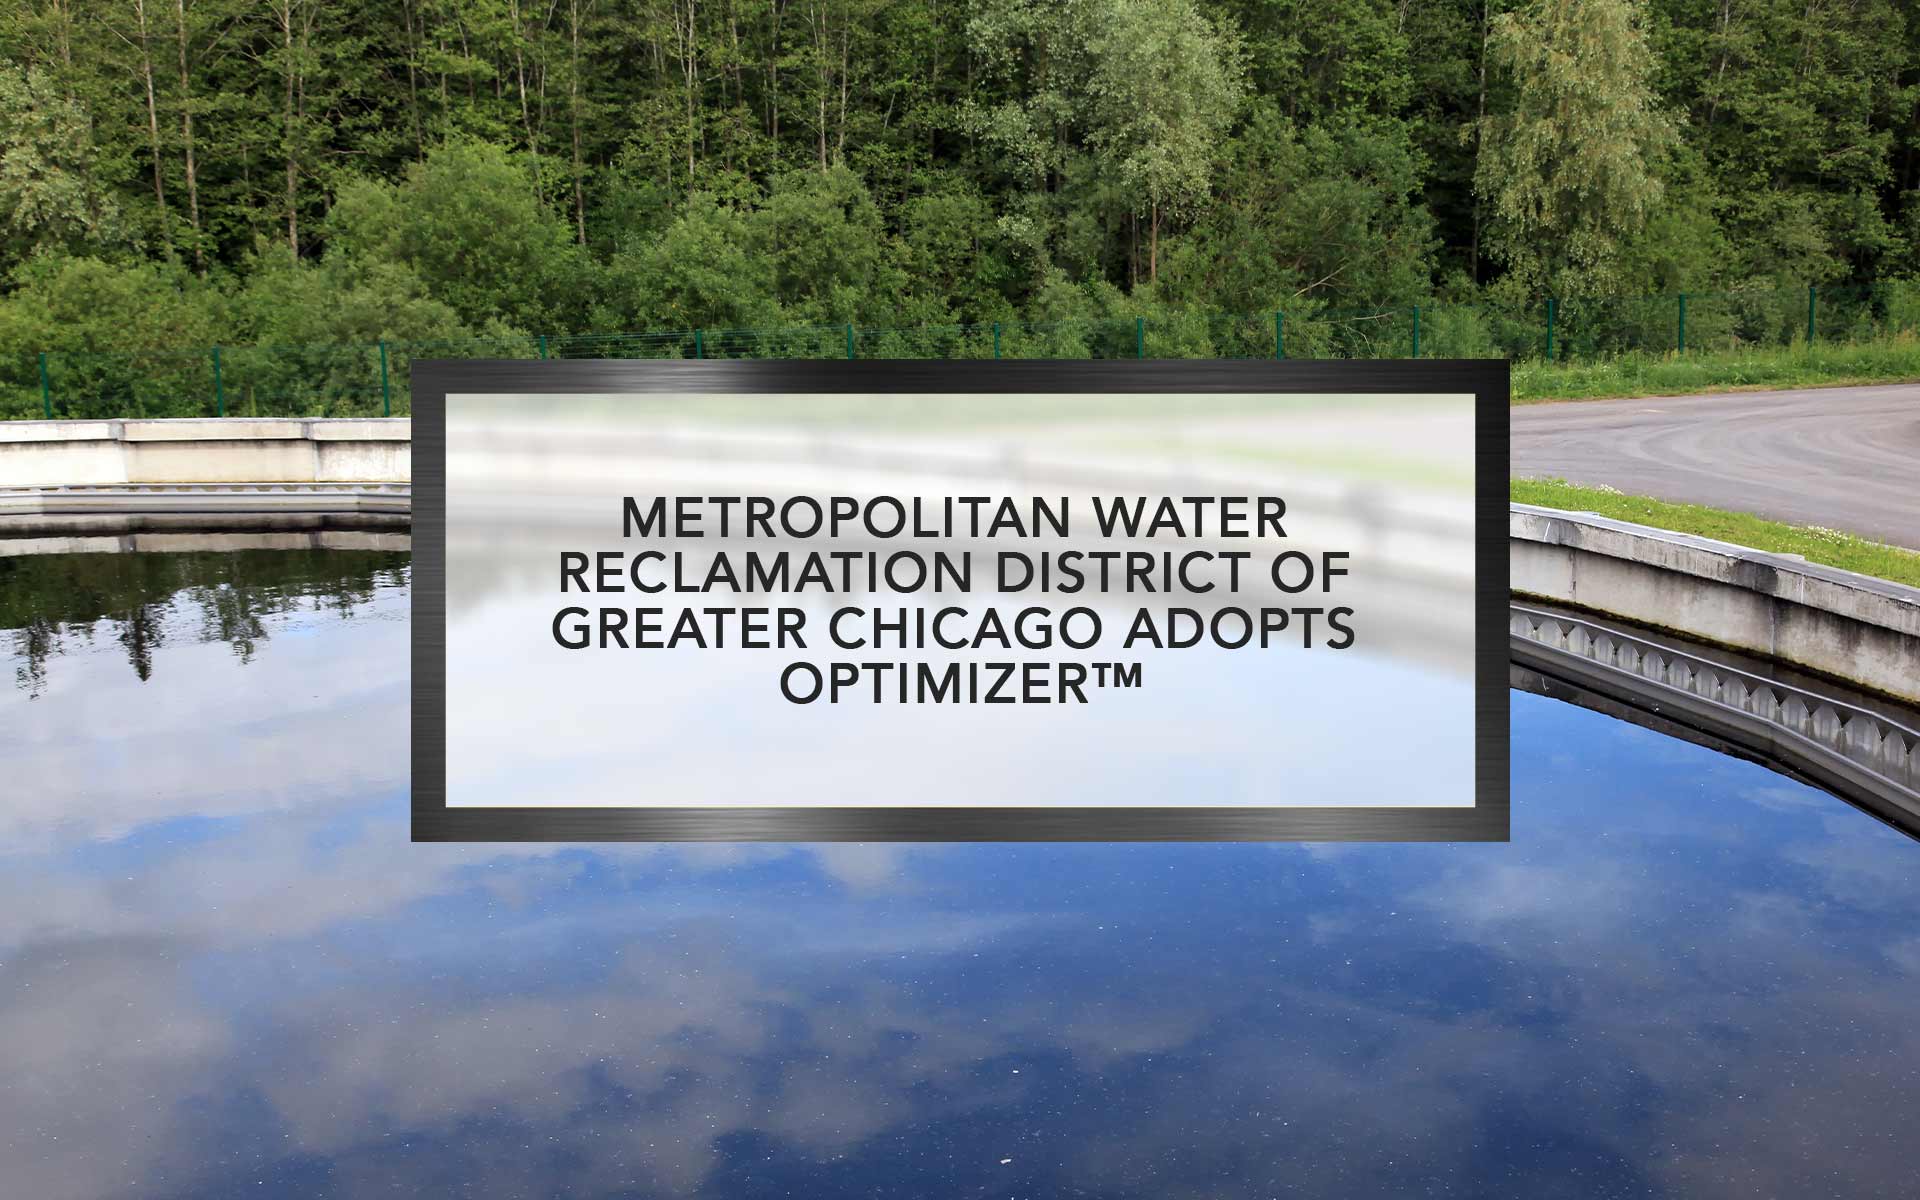 Metropolitan Water Reclamation District of Greater Chicago adopts Optimizer™